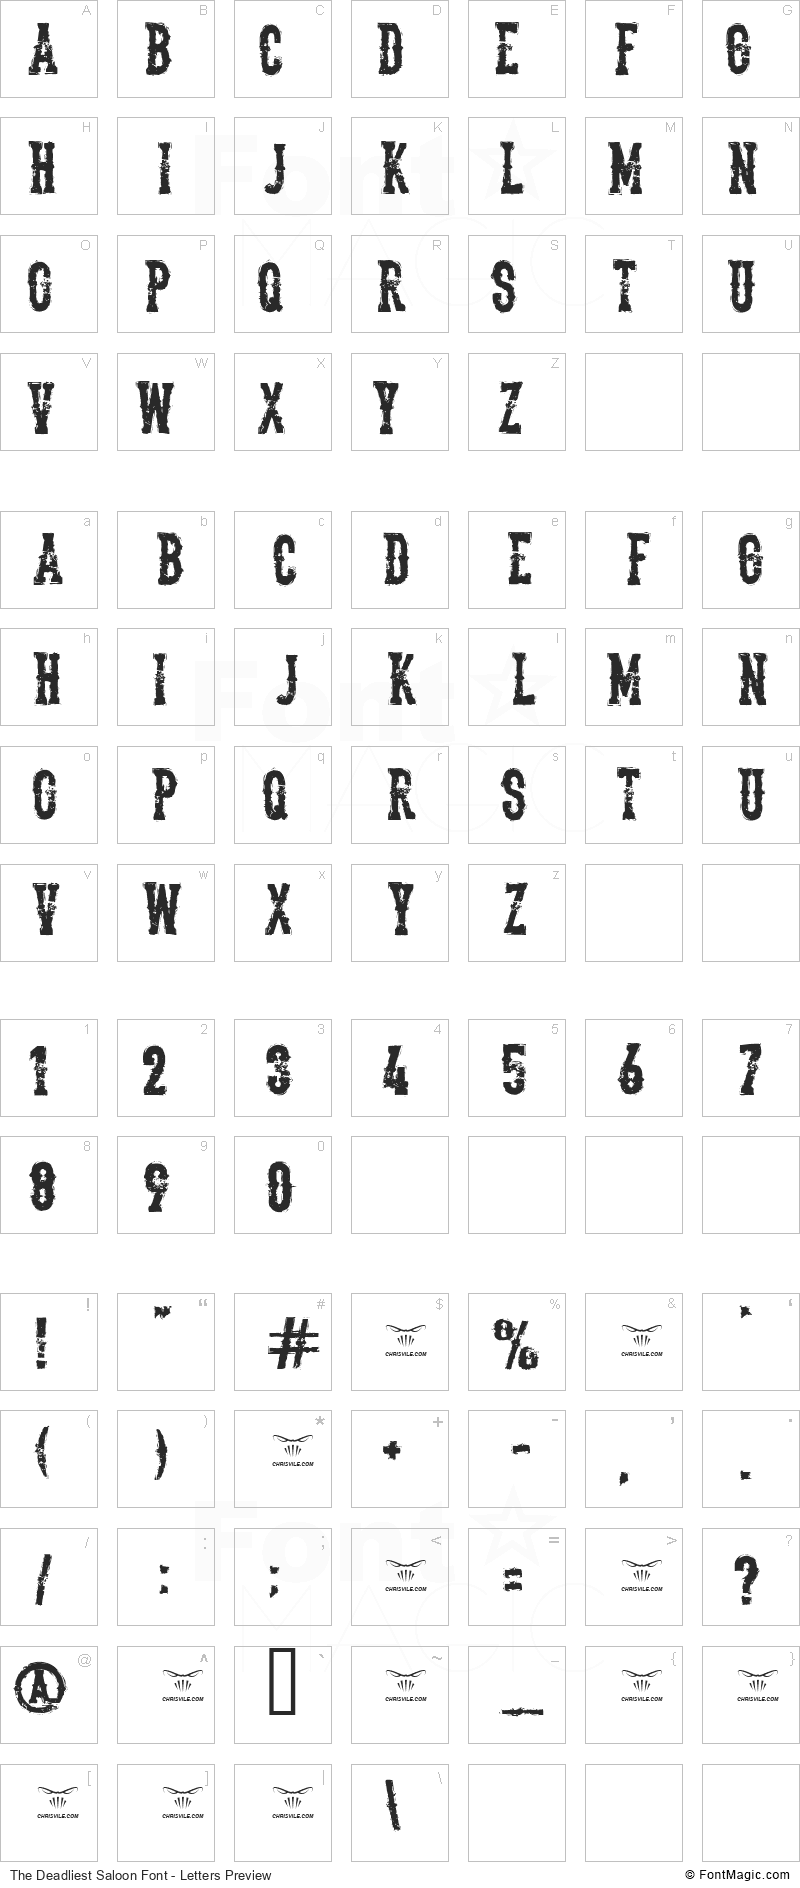 The Deadliest Saloon Font - All Latters Preview Chart